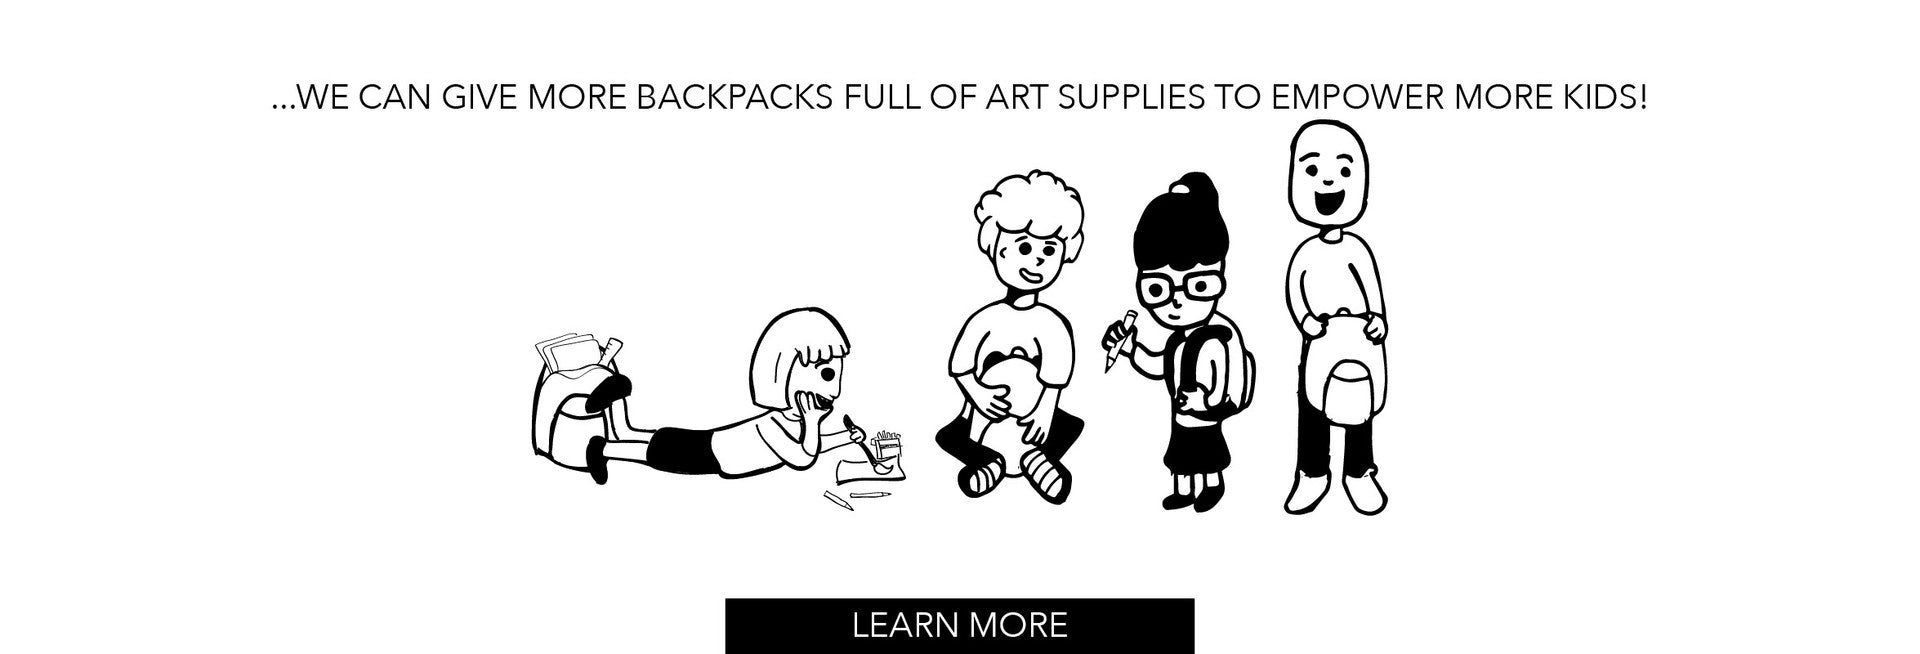 ...we can give more backpacks full of art supplies to empower more kids!